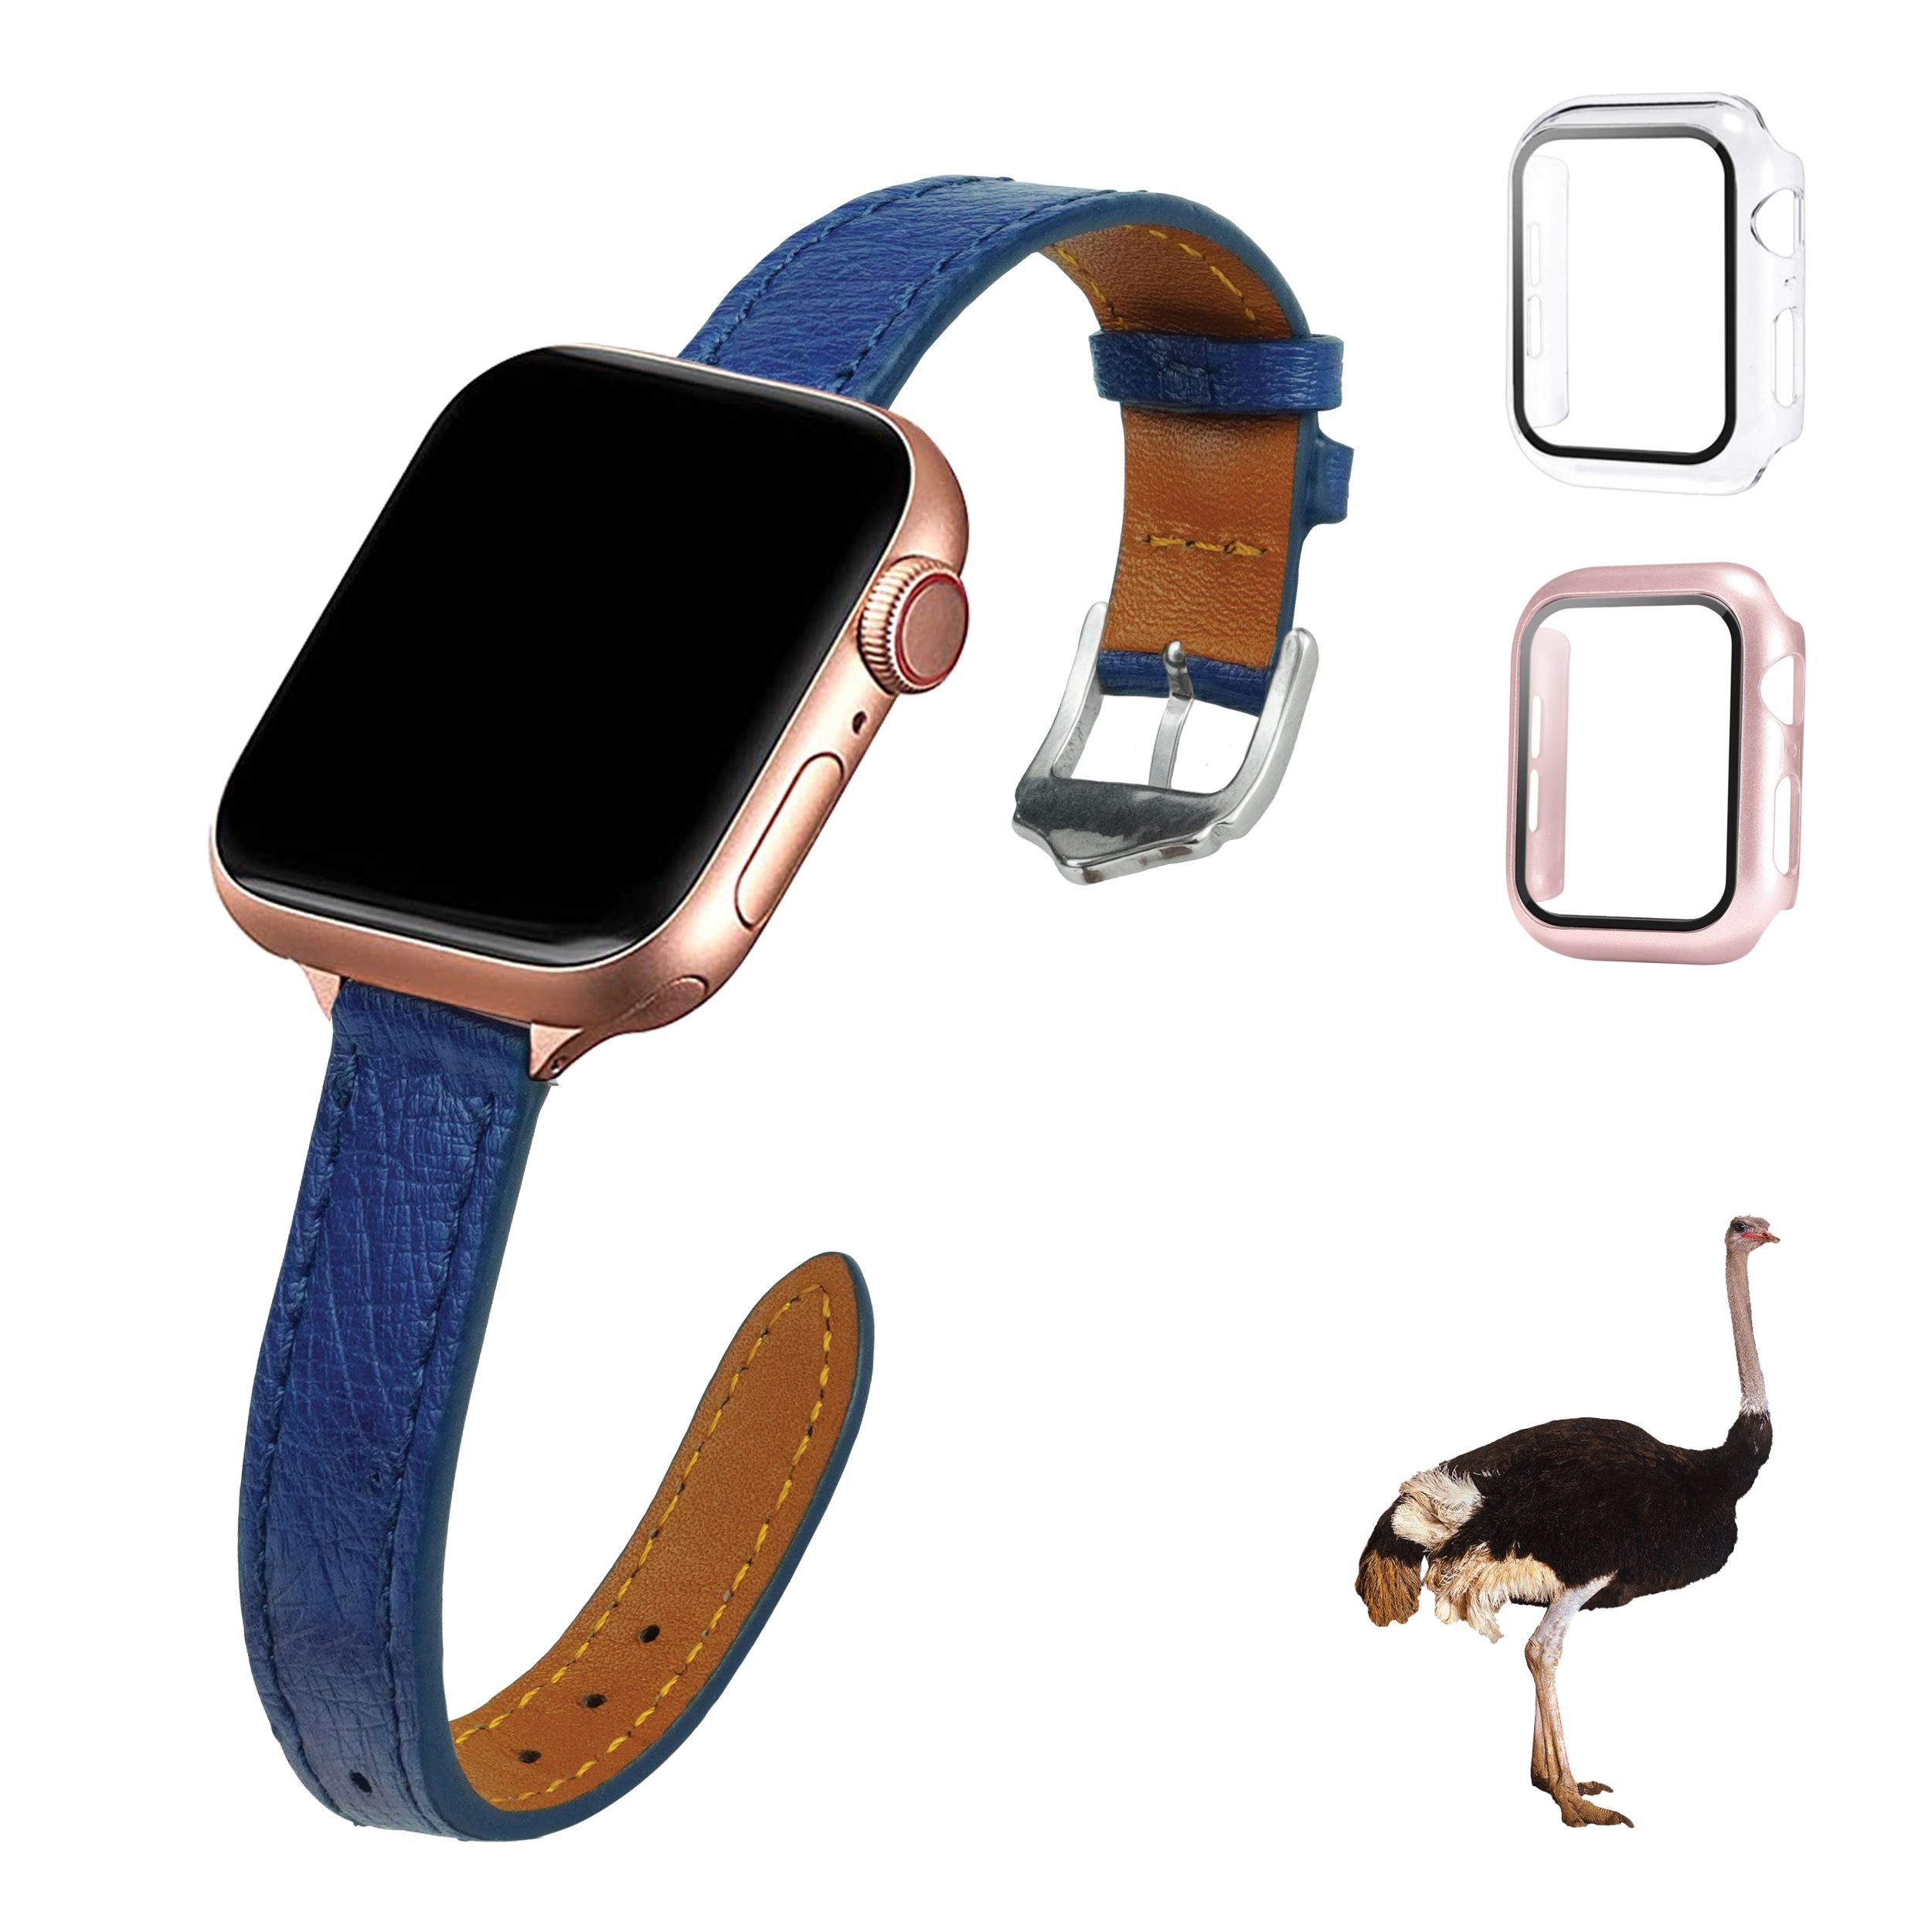 Blue Flat Ostrich Leather Band Compatible Apple Watch Iwatch 38mm Screen Protector Case Black Adapter Replacement Strap For Smartwatch Series 1 2 3 Leather Handmade AW-184S-W-38MM